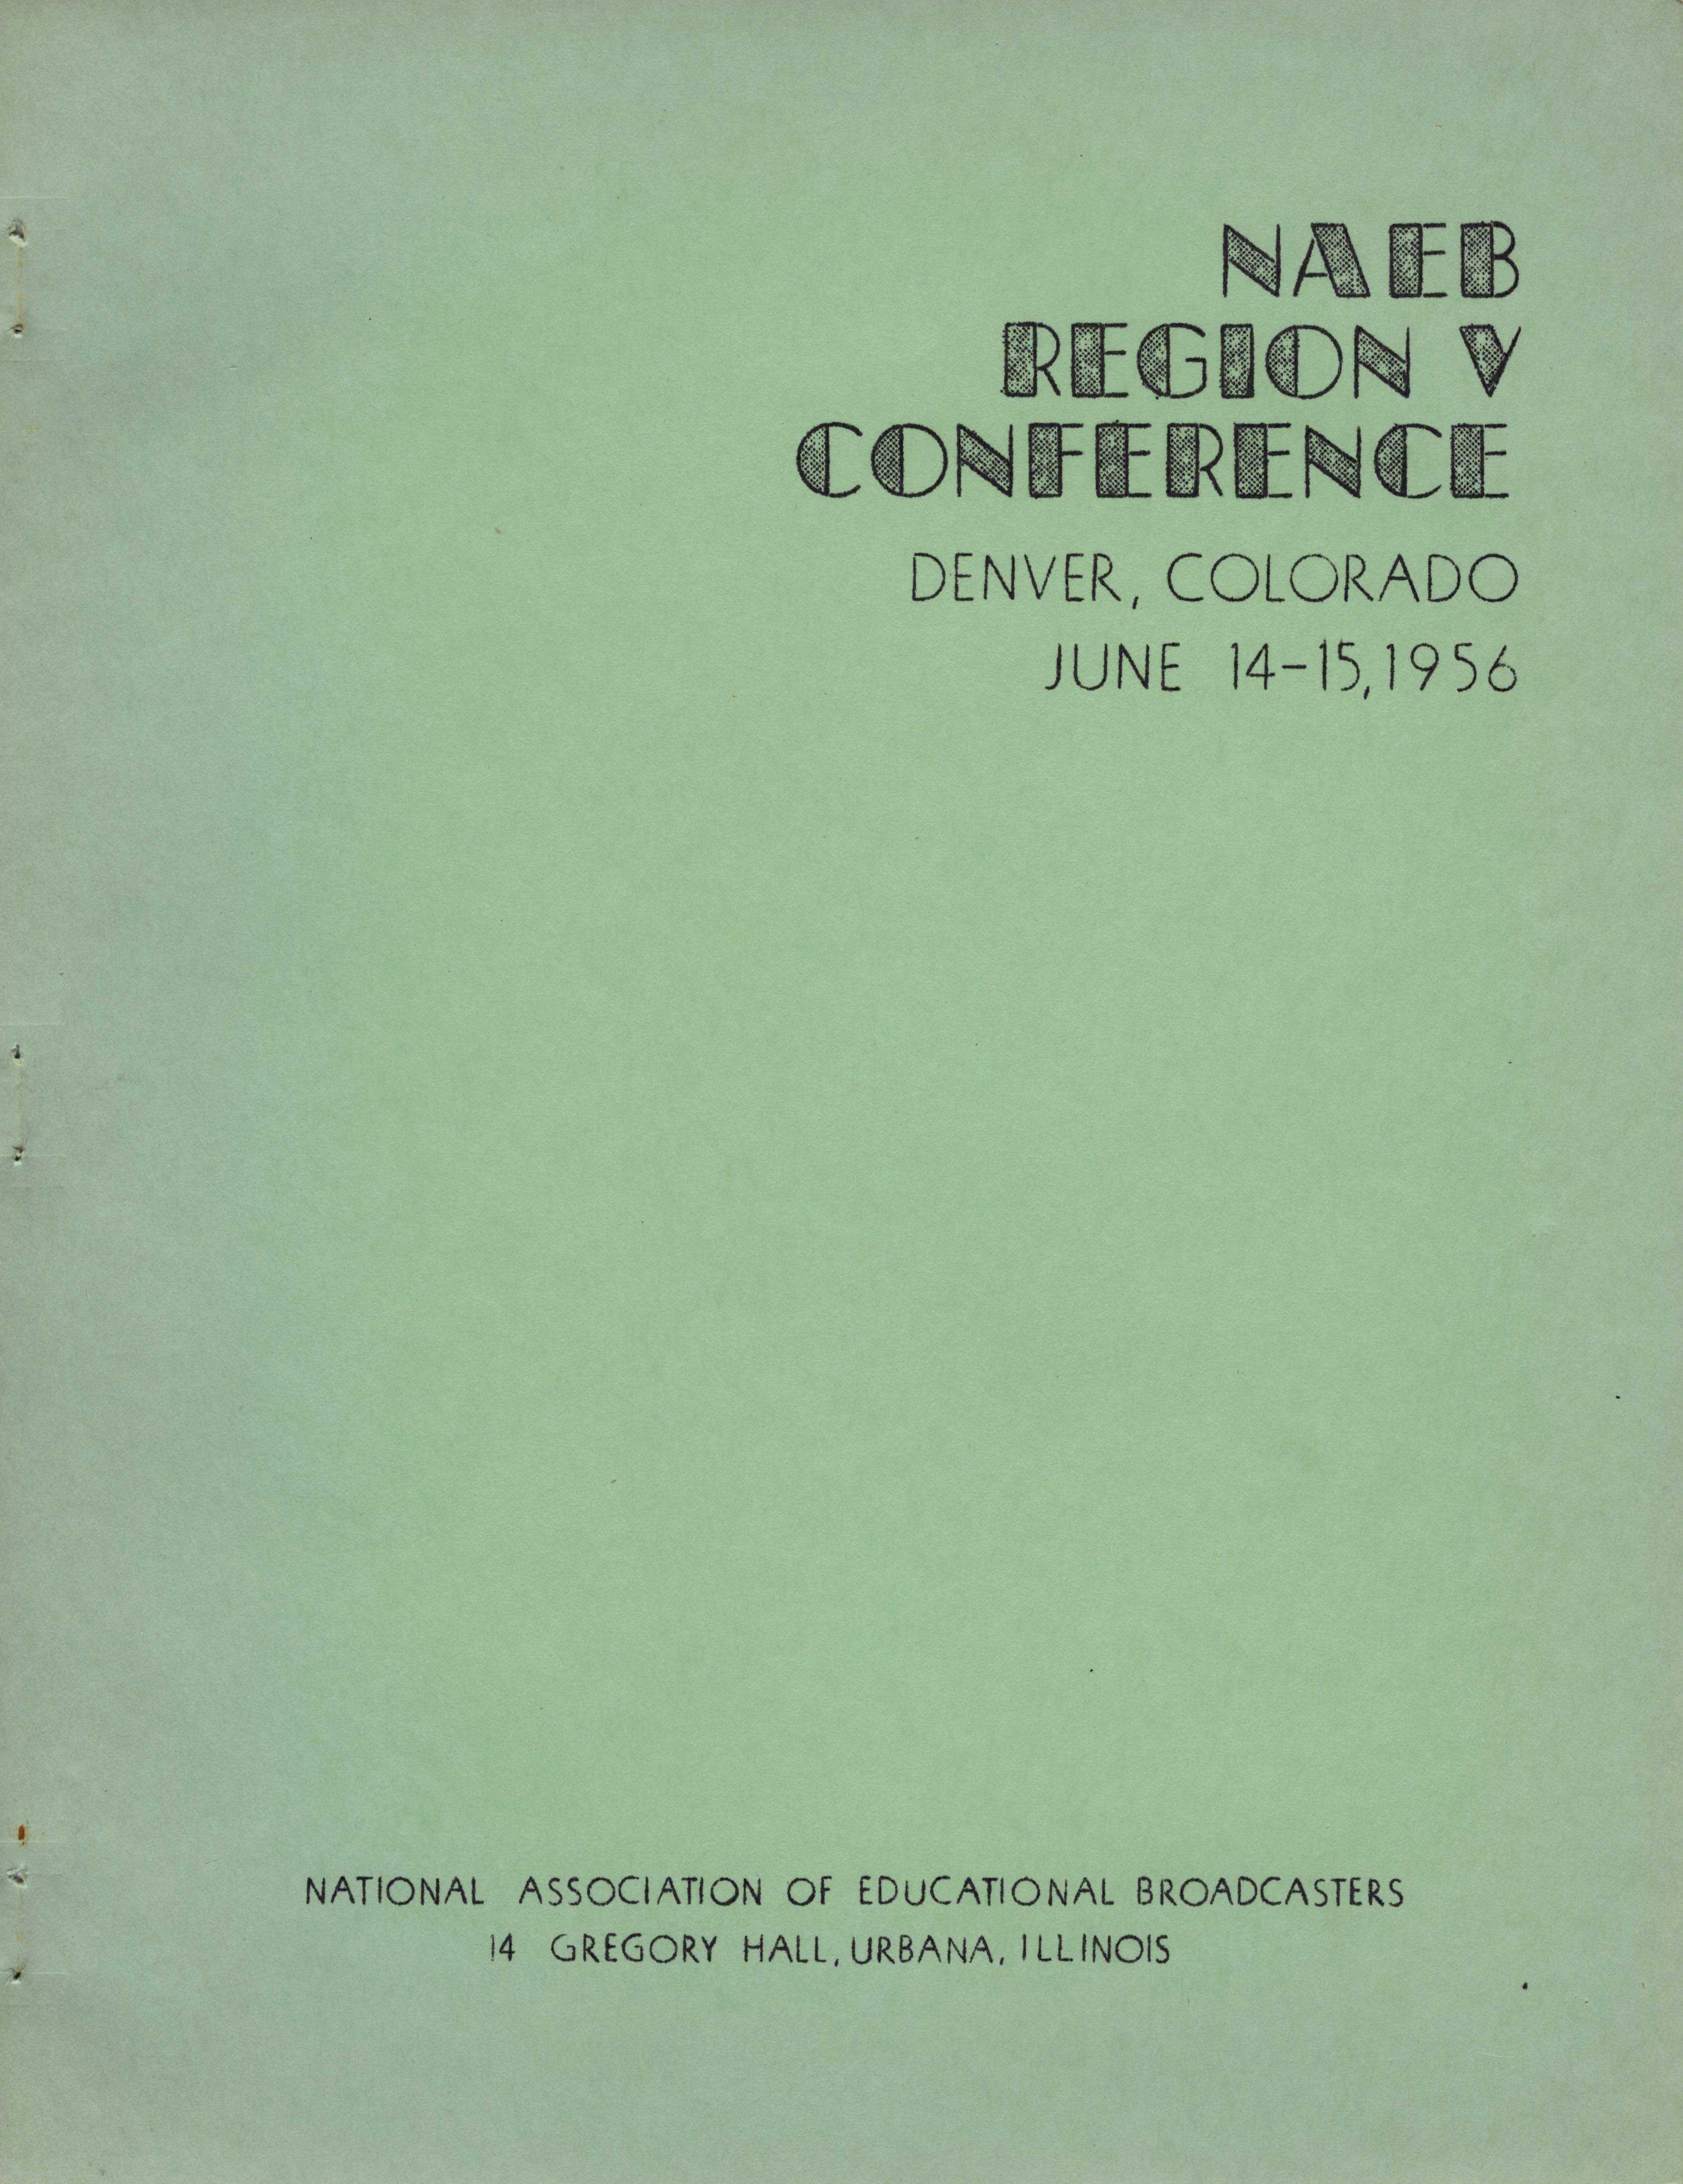 [Report on the NAEB Region V Conference](/document/naeb-b074-f11-02/) held in Denver, Colorado, from June 14 to 15, 1956.